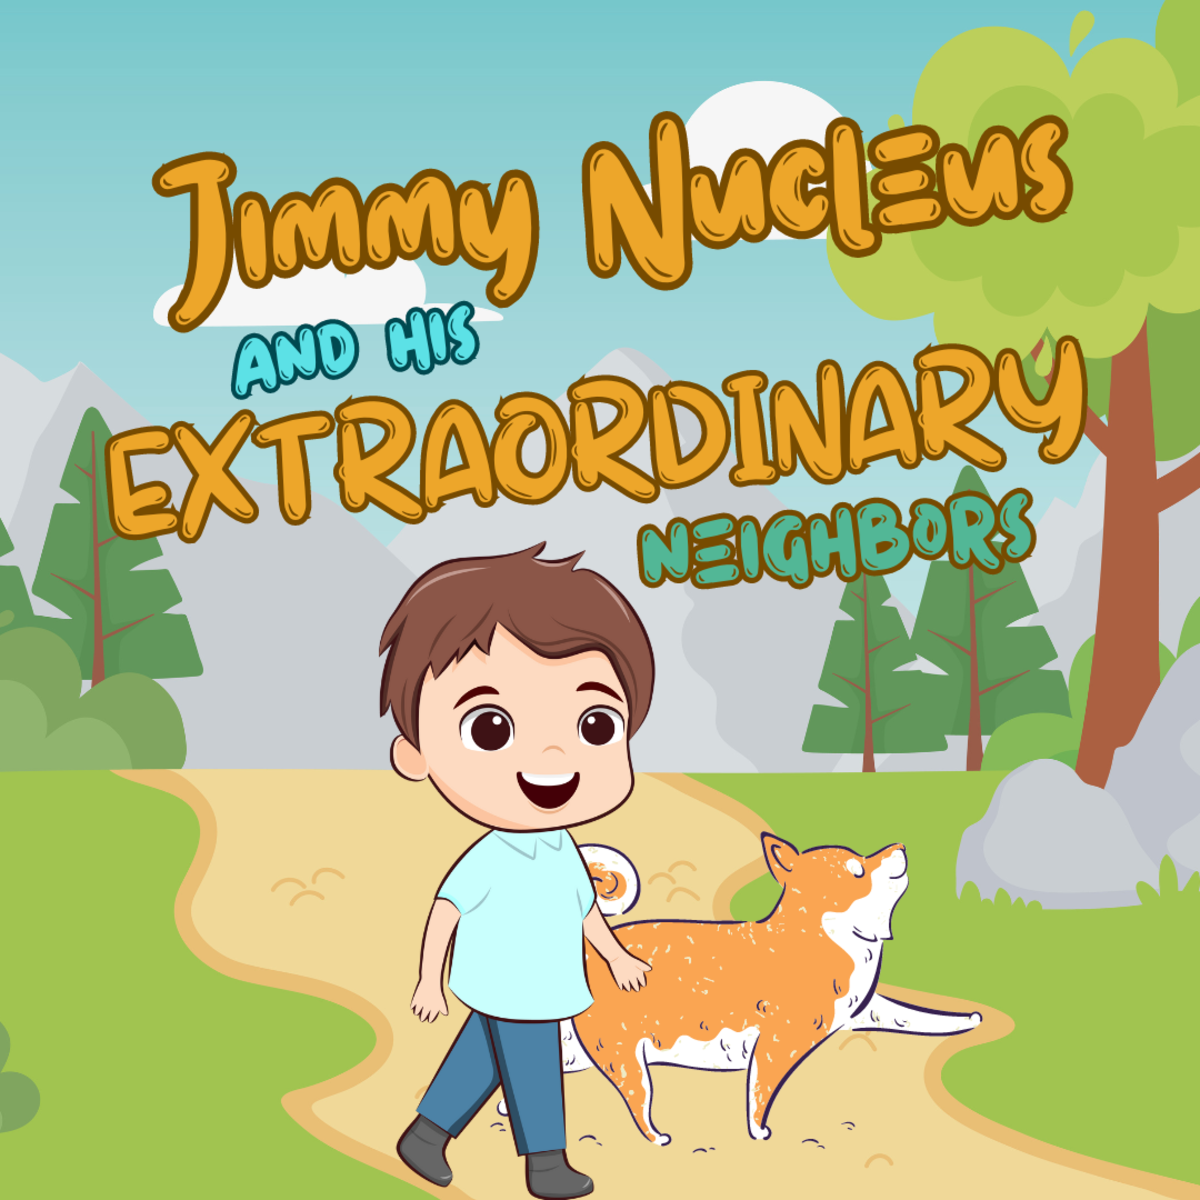 Jimmy Nucleus and His Extraordinary Neighbors